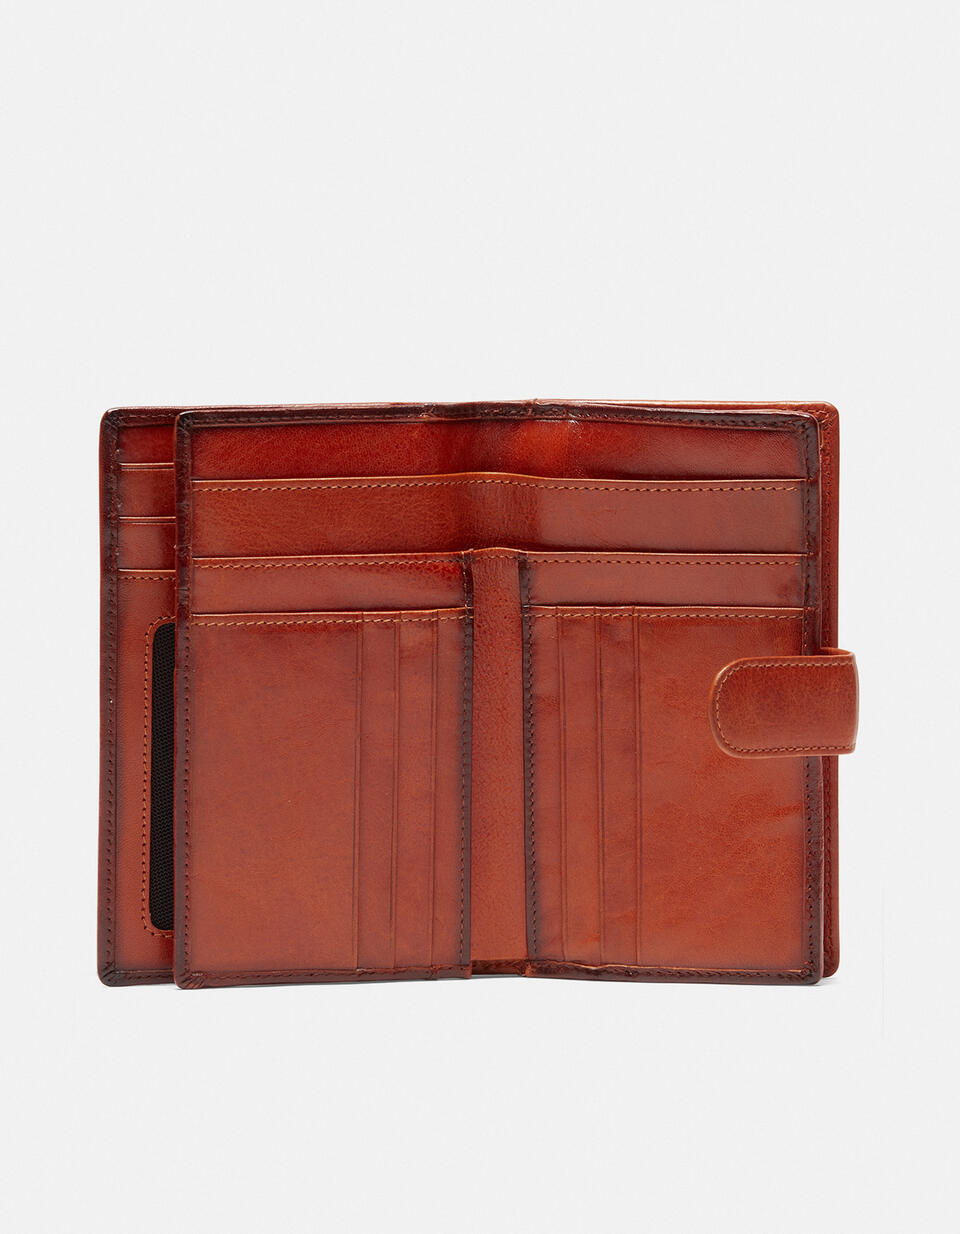 Wallet with coin purse - Women's Wallets - Women's Wallets | Wallets  - Women's Wallets - Women's Wallets | WalletsCuoieria Fiorentina